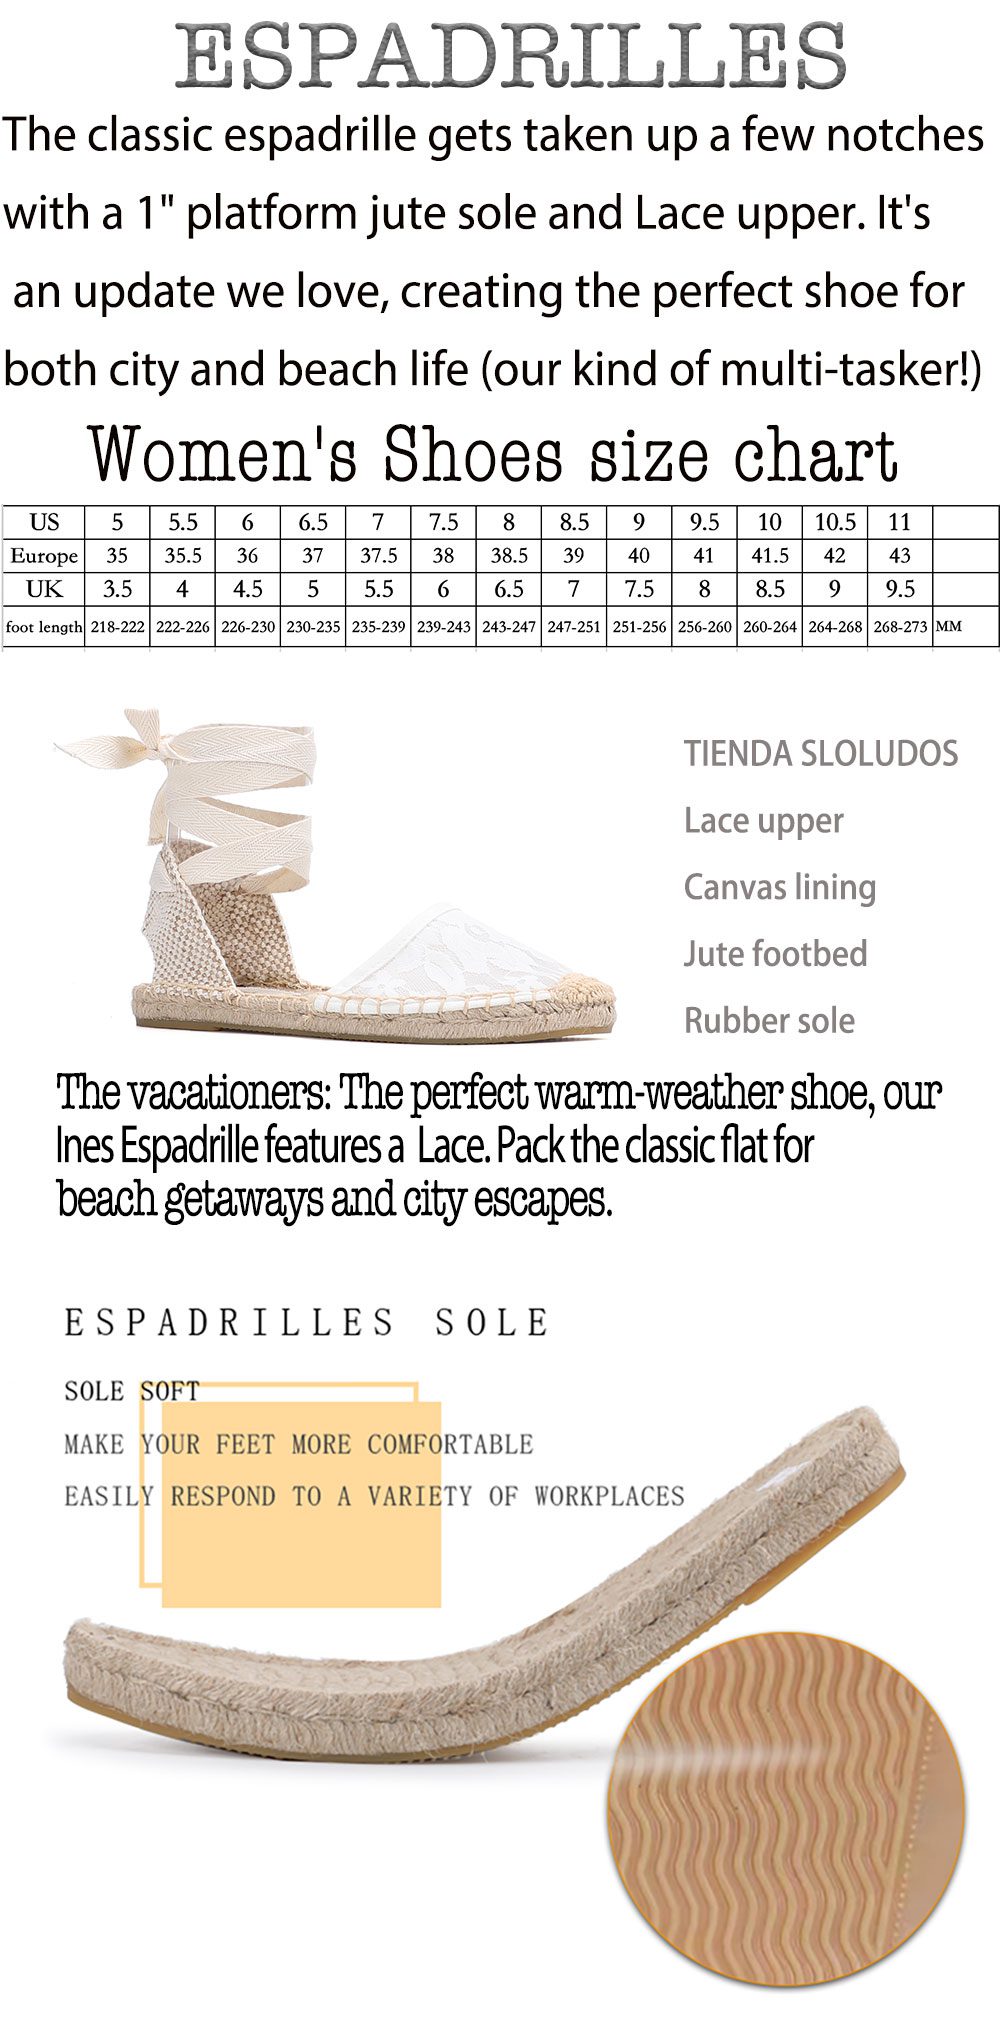 2021 Solid Sandalias Mujer Offer Lace Ankle-wrap Flat With Open Sapatos Mulher Sandals Sapato Feminino Womens Espadrilles Shoes